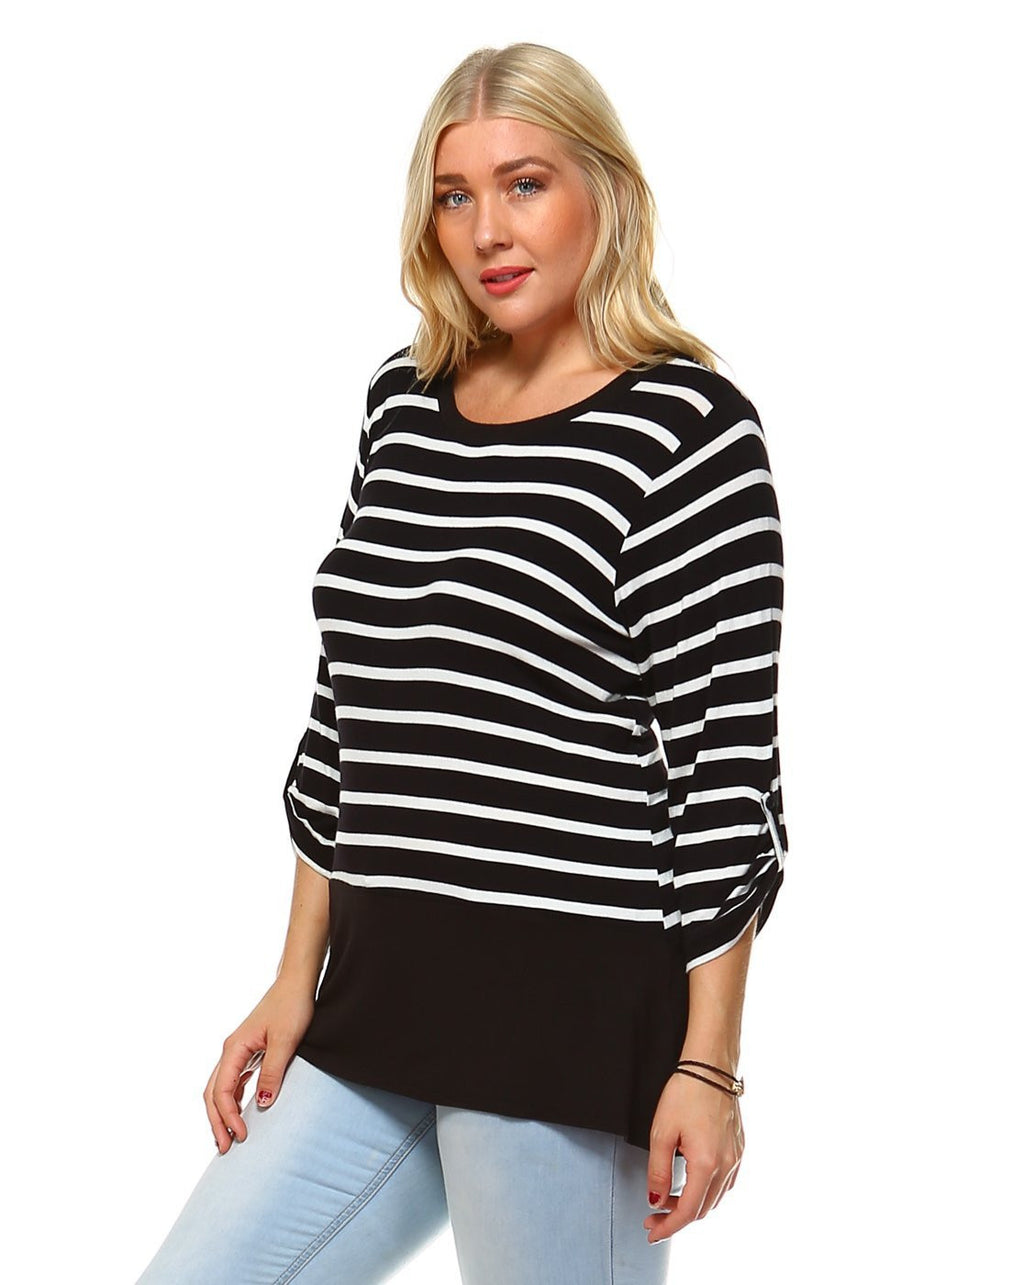 Black and White Striped Fold-over 3/4 Sleeve top with button Perfect for Spring & Summer, Evening wear, Festival, Beach Day, Vacation, Dance, Poolside Parties